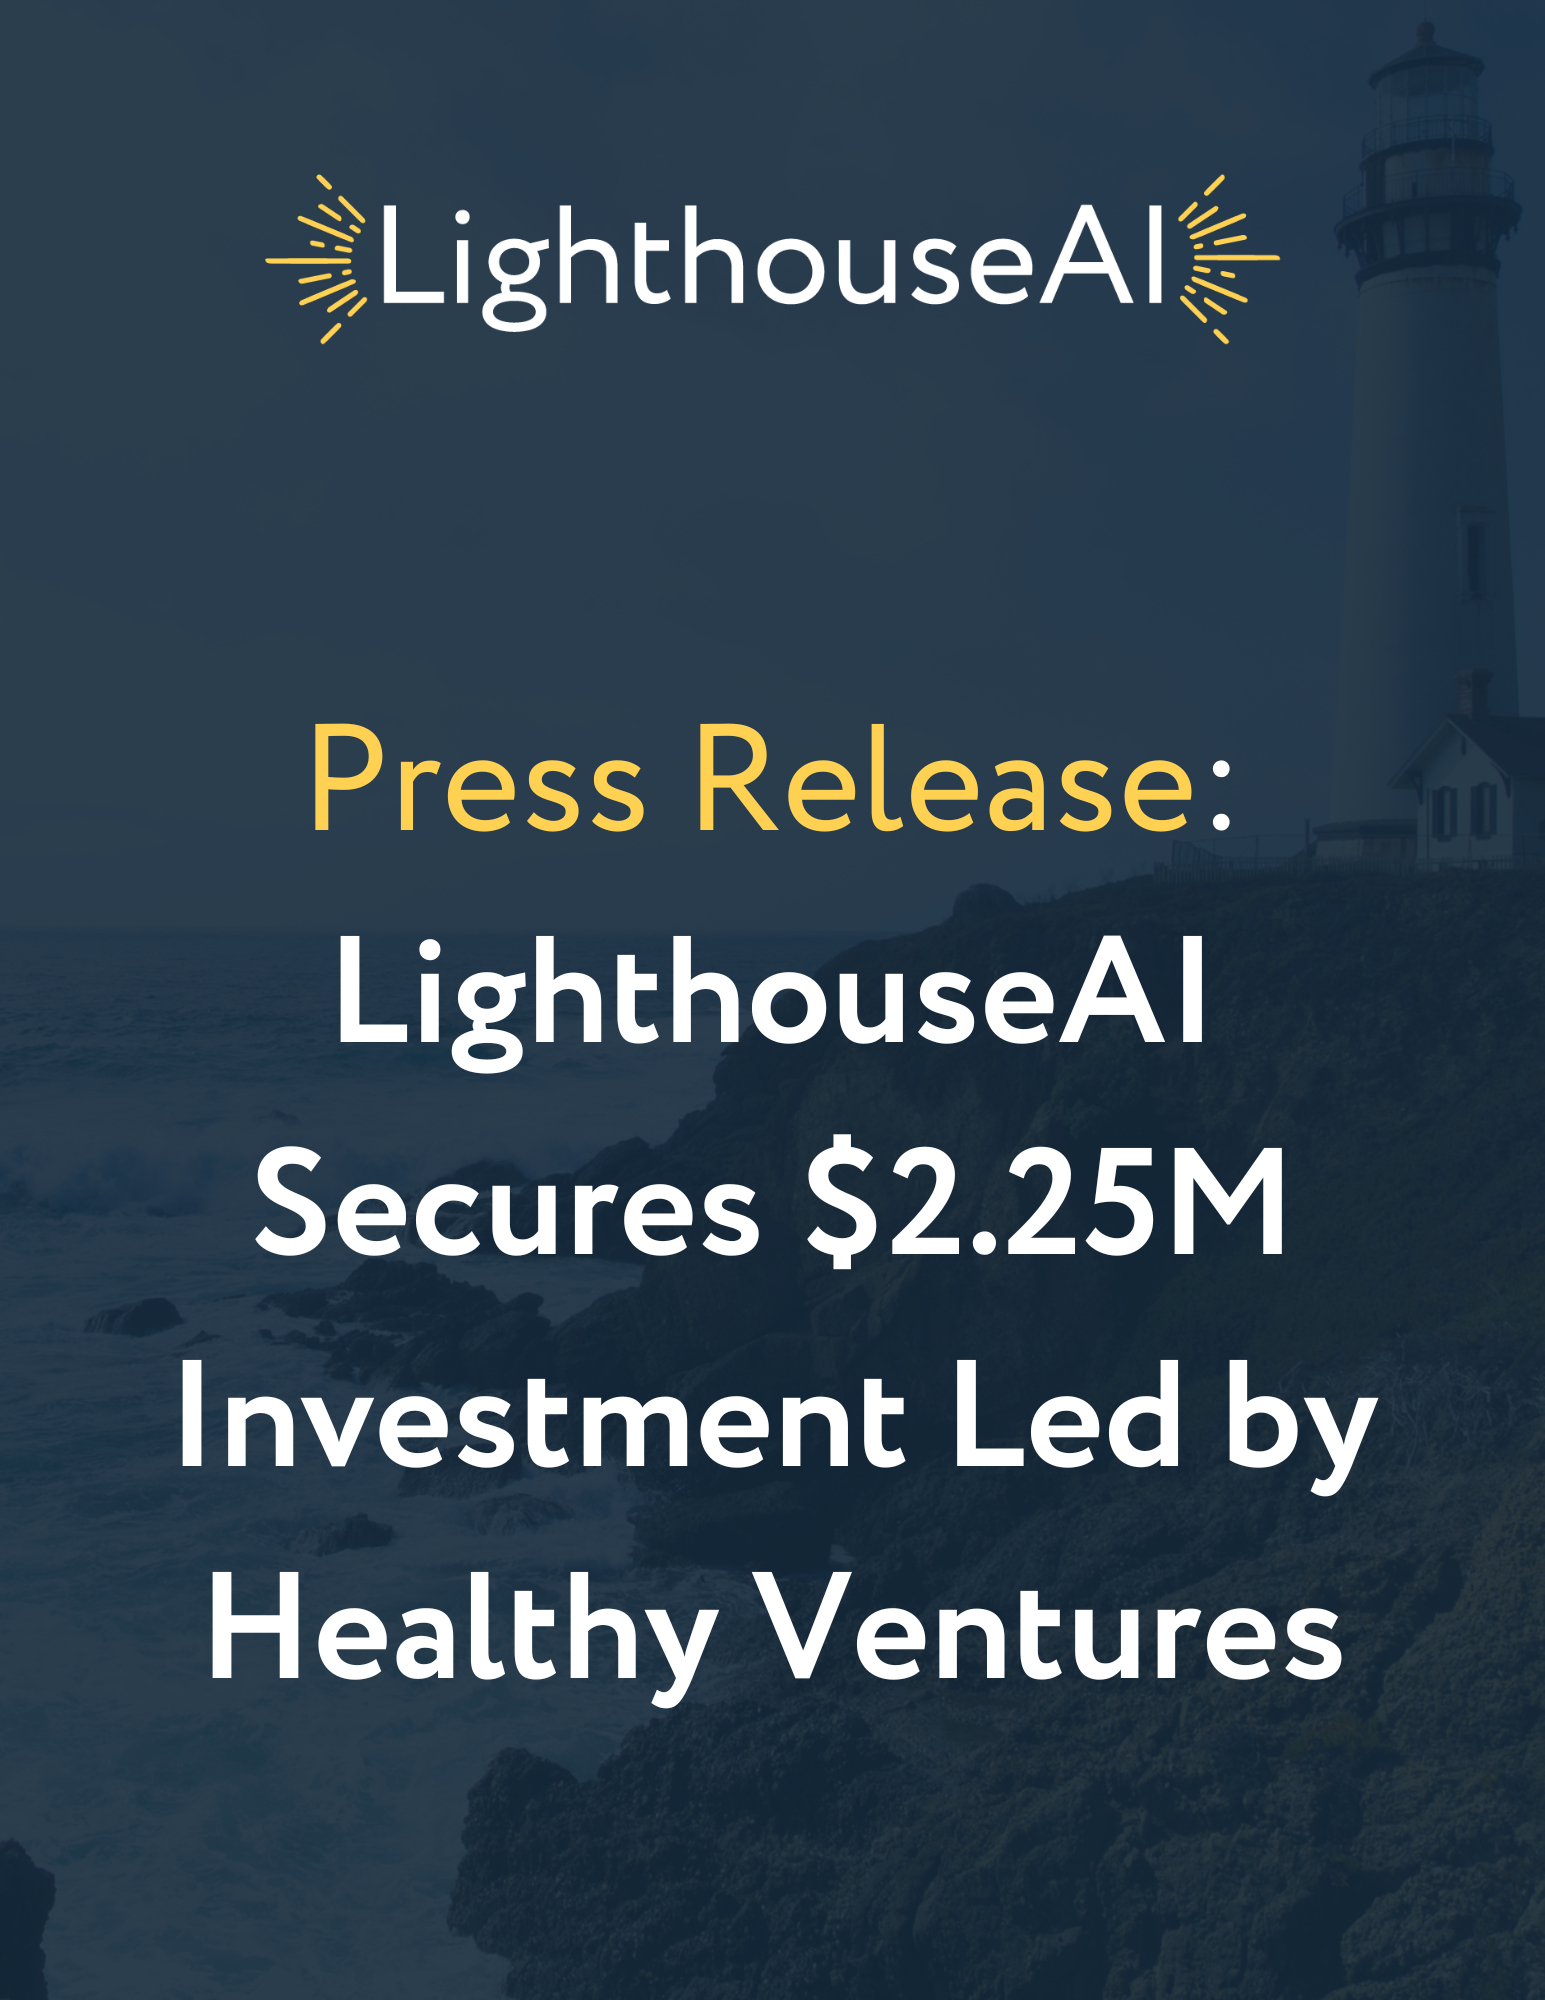 LighthouseAI Secures $2.25M Investment Led by Healthy Ventures